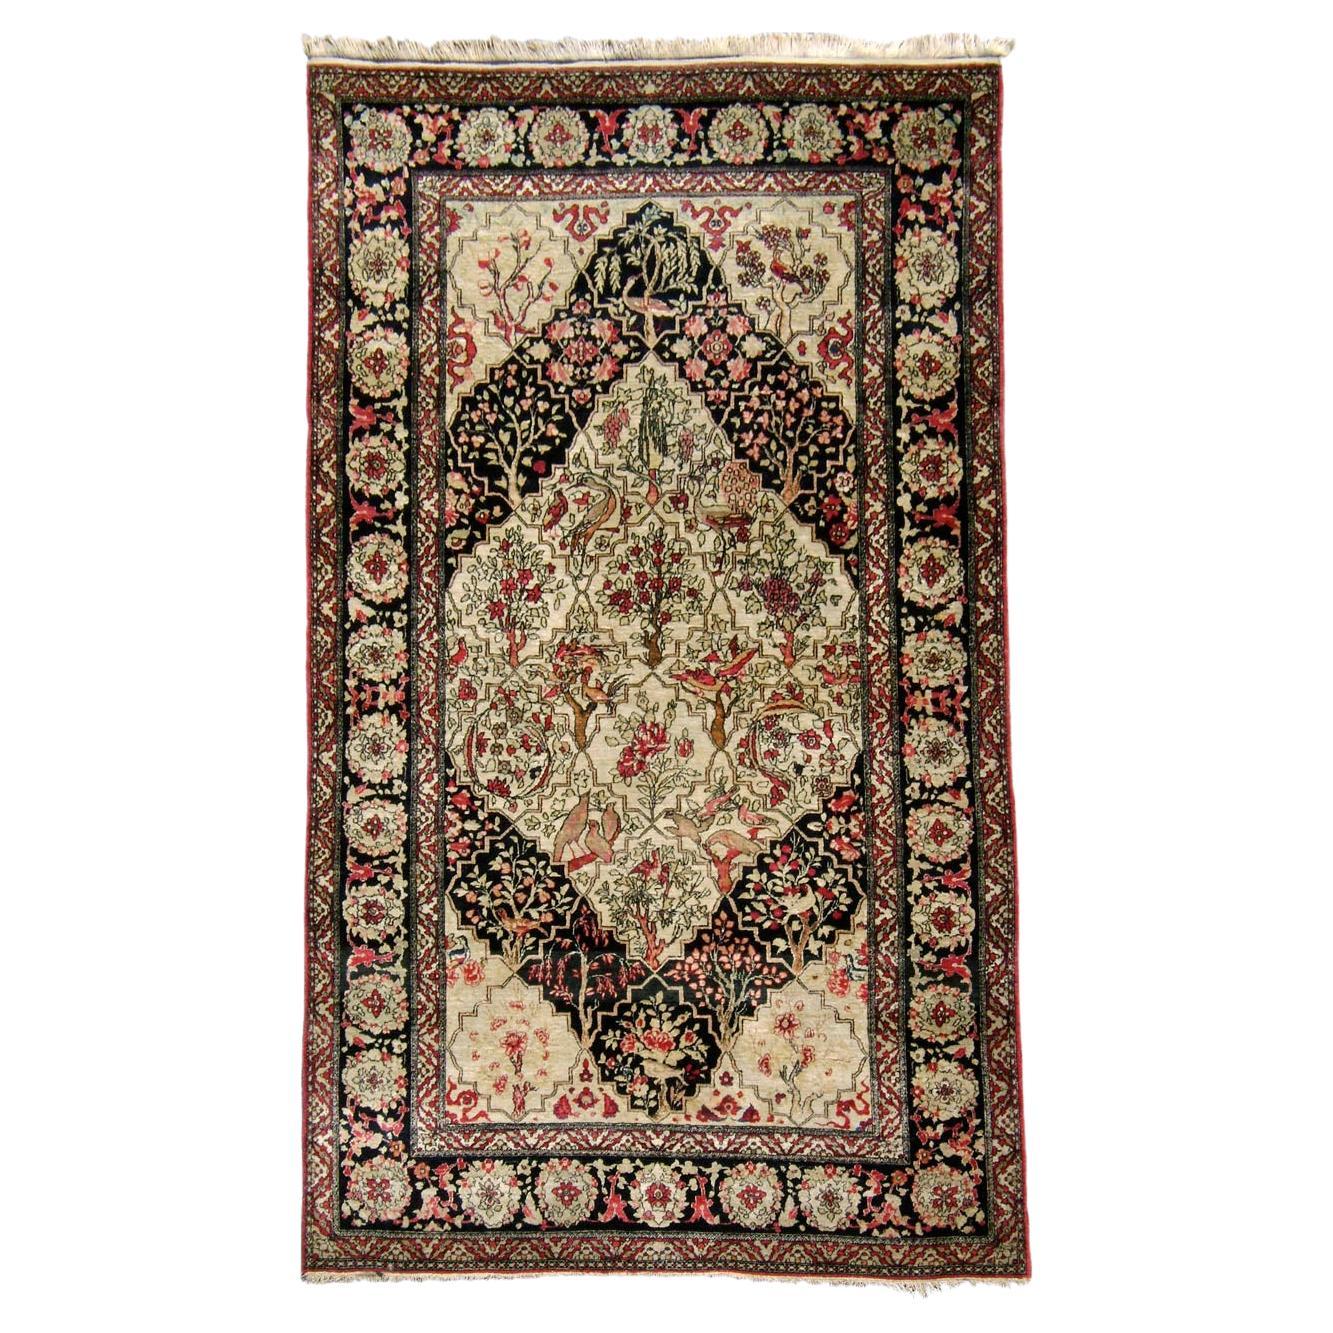 Antique Persian Isfahan Rug, Early 20th Century